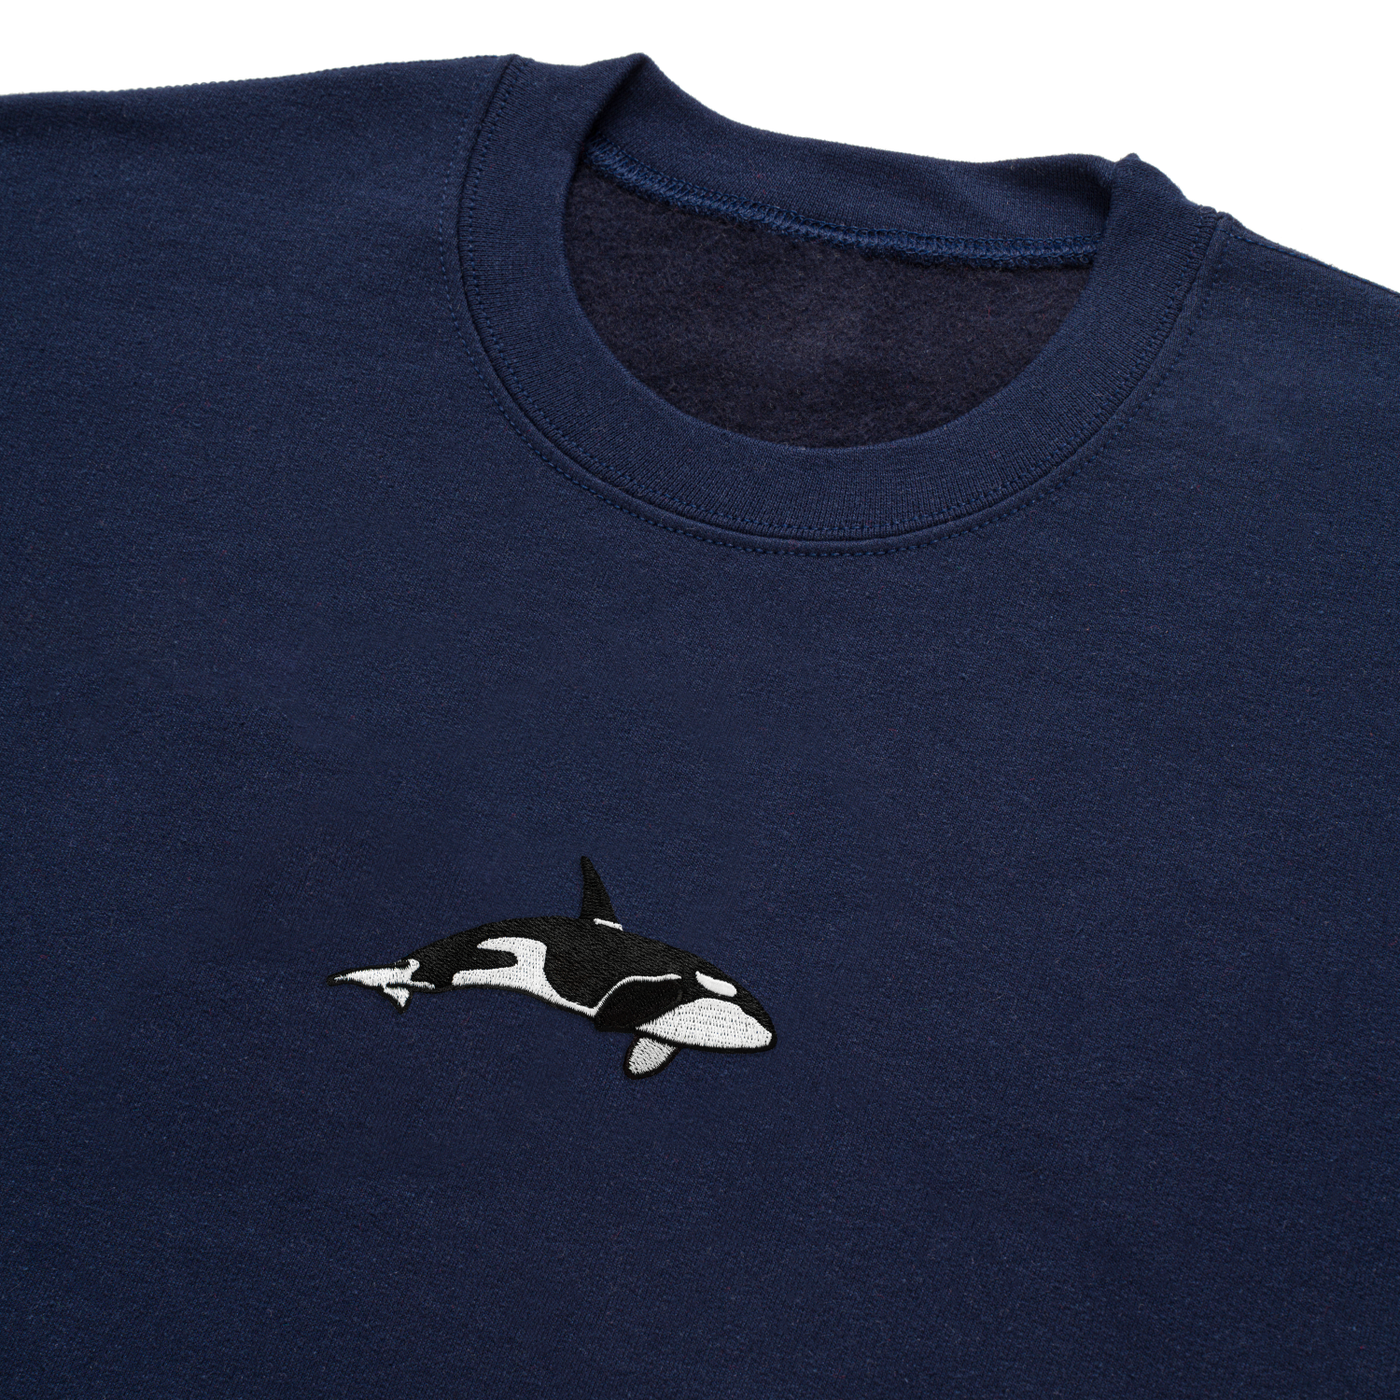 Bobby's Planet Men's Embroidered Orca Sweatshirt from Seven Seas Fish Animals Collection in Navy Color#color_navy